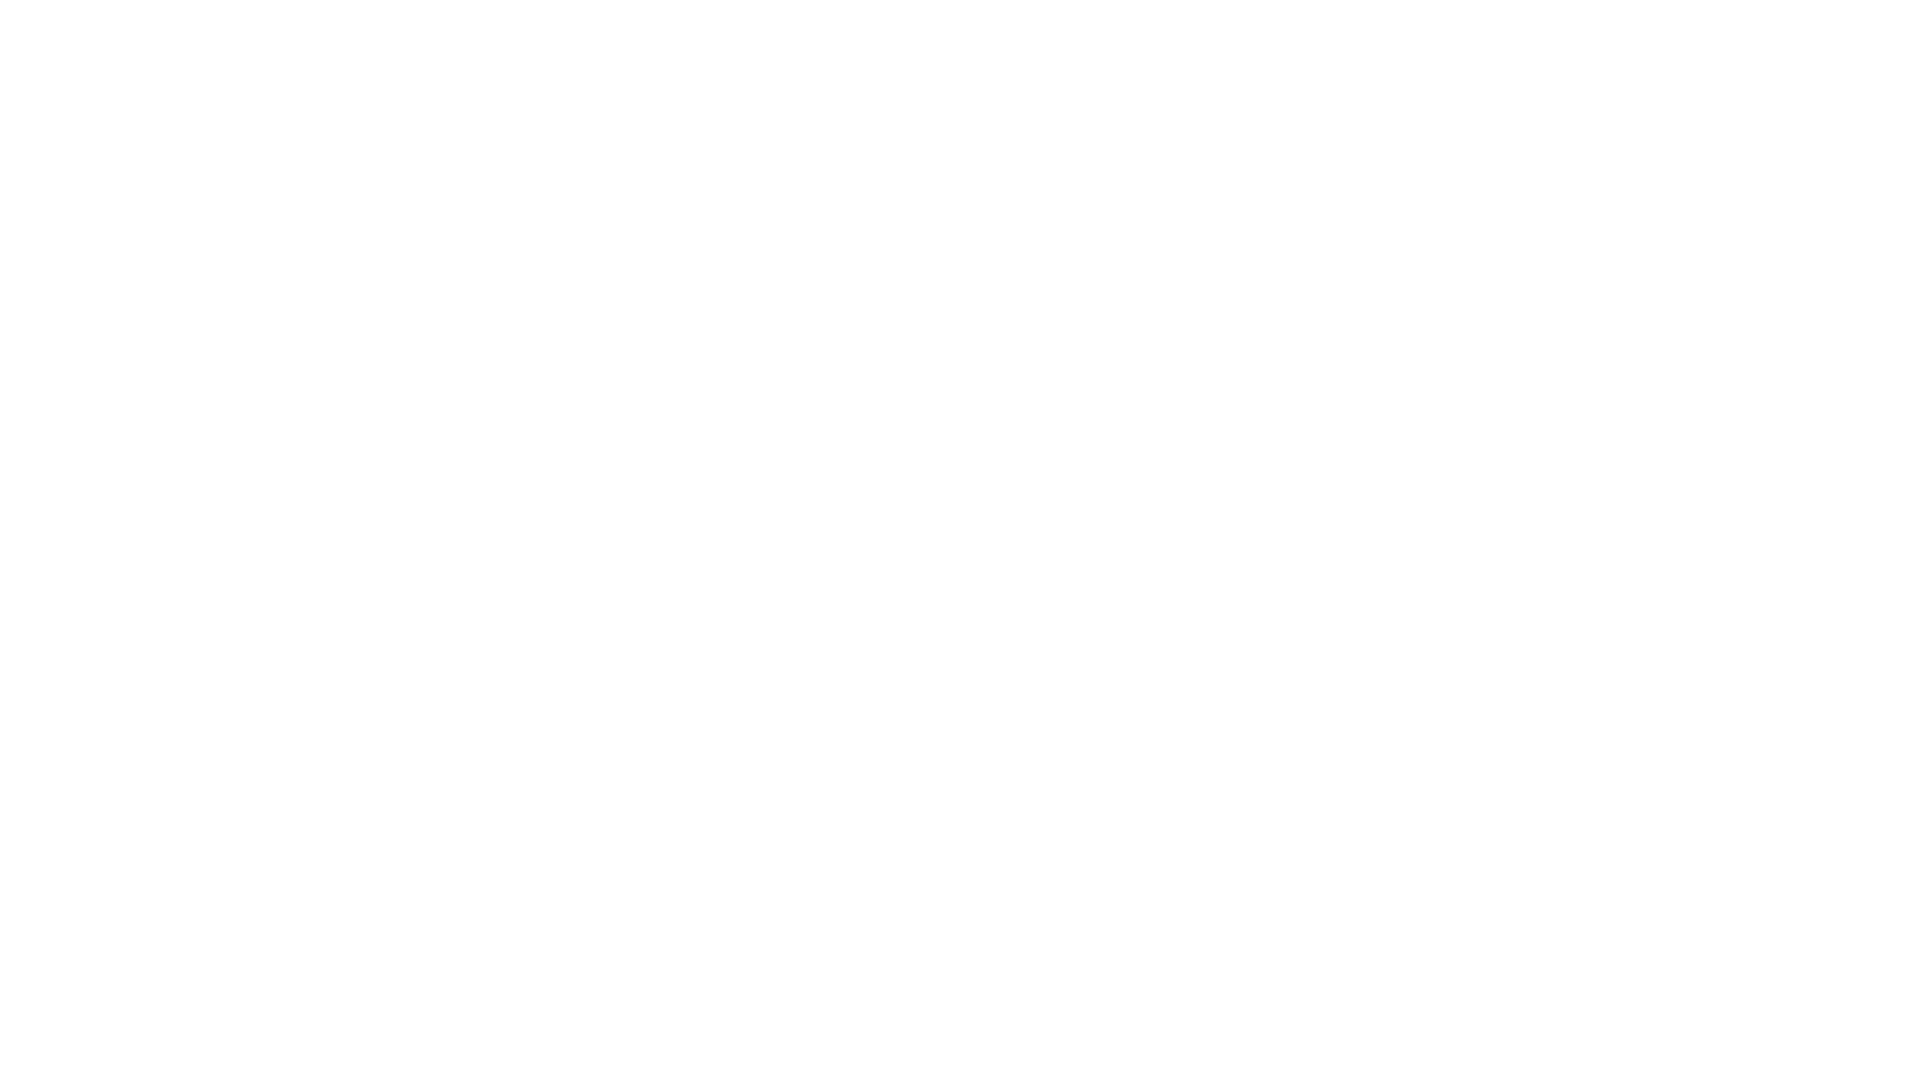 The Lacey Coalition